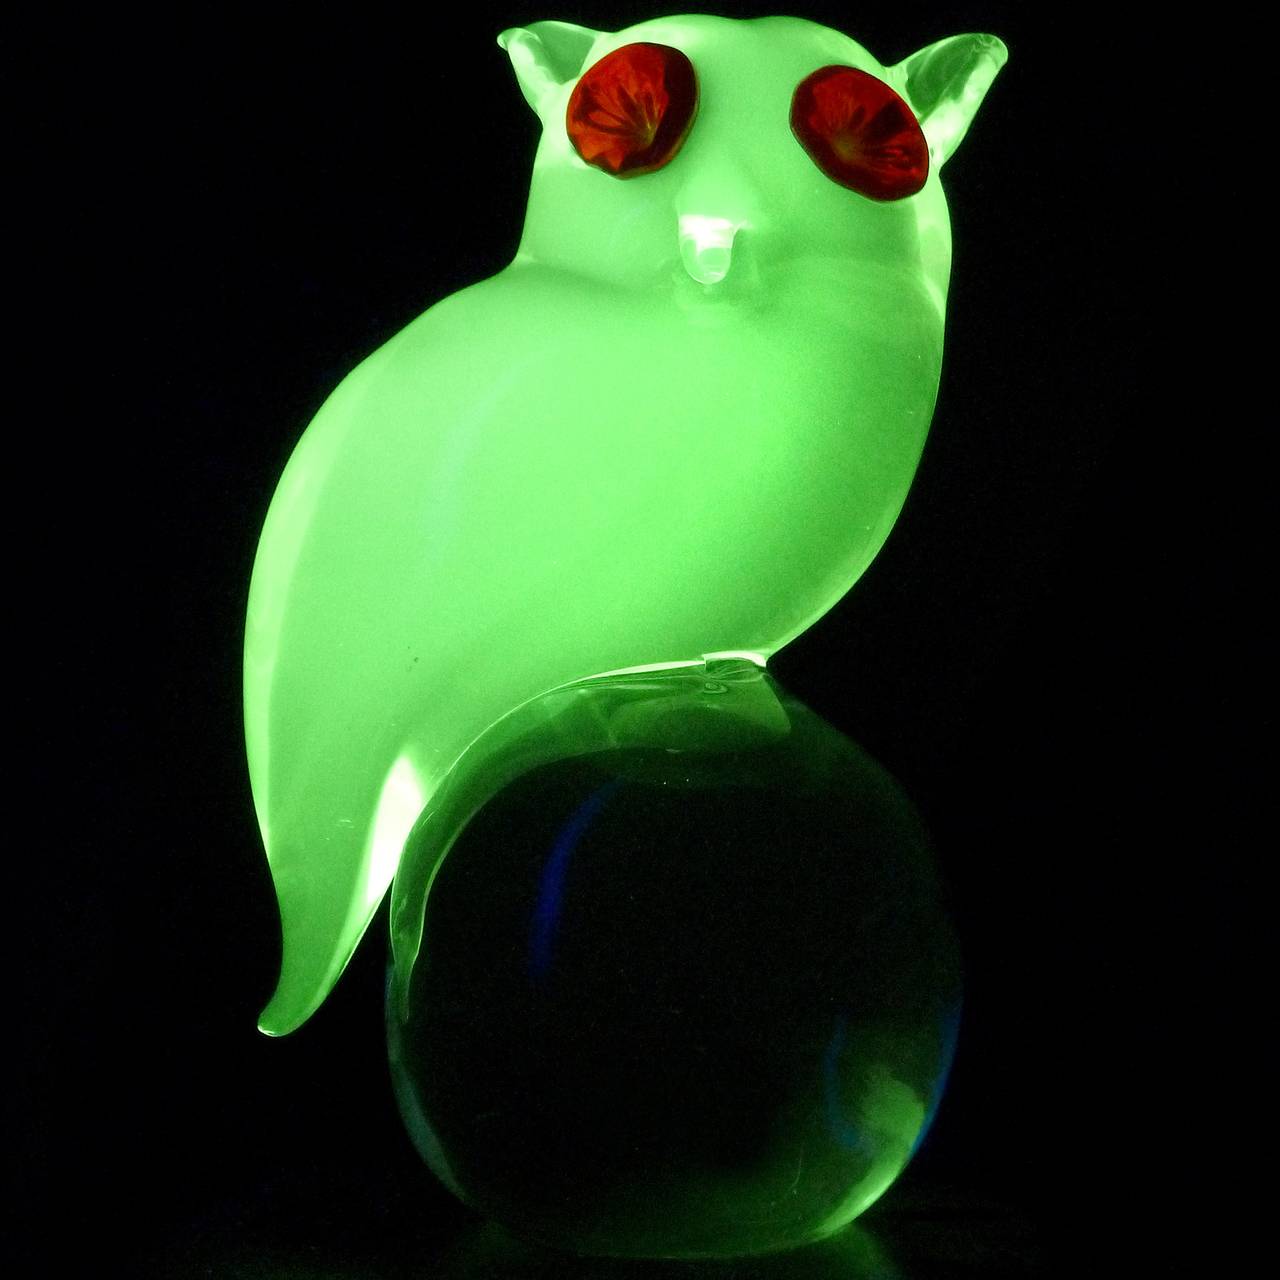 FREE Shipping Worldwide! See details below description.

Incredible Murano Hand Blown Neon Yellow Green Art Glass Owl Sculpture on Clear Base. Attributed to the Salviati company. The piece glows like crazy under a black light, made in 